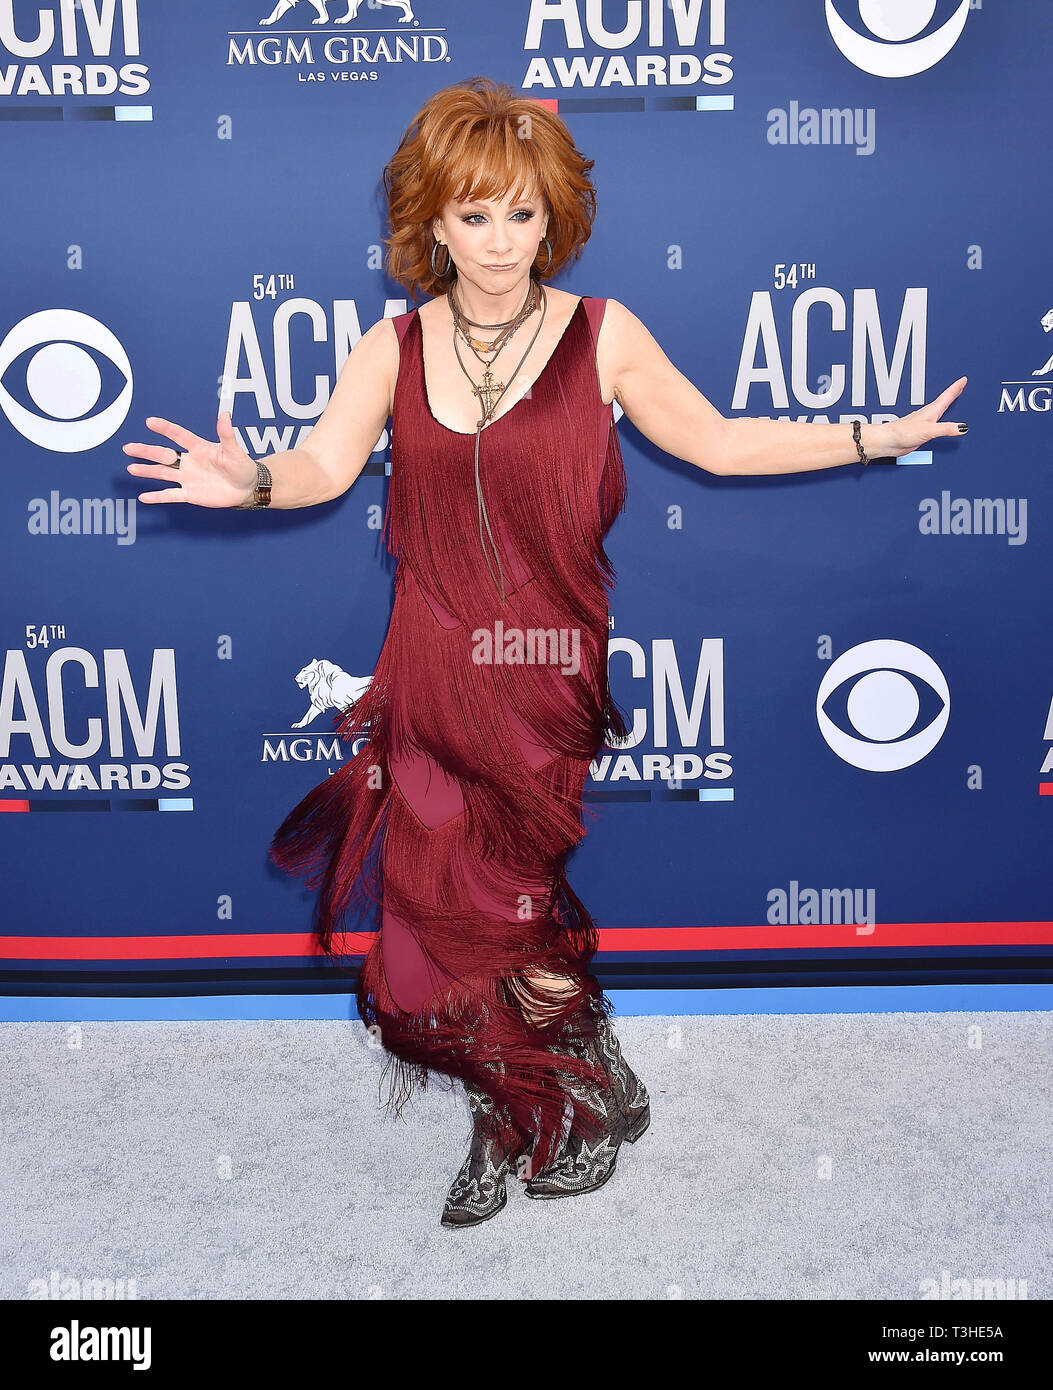 LAS VEGAS, CA - APRIL 07: Reba McEntire attends the 54th Academy Of Country Music Awards at MGM Grand Hotel & Casino on April 07, 2019 in Las Vegas, Nevada. Stock Photo